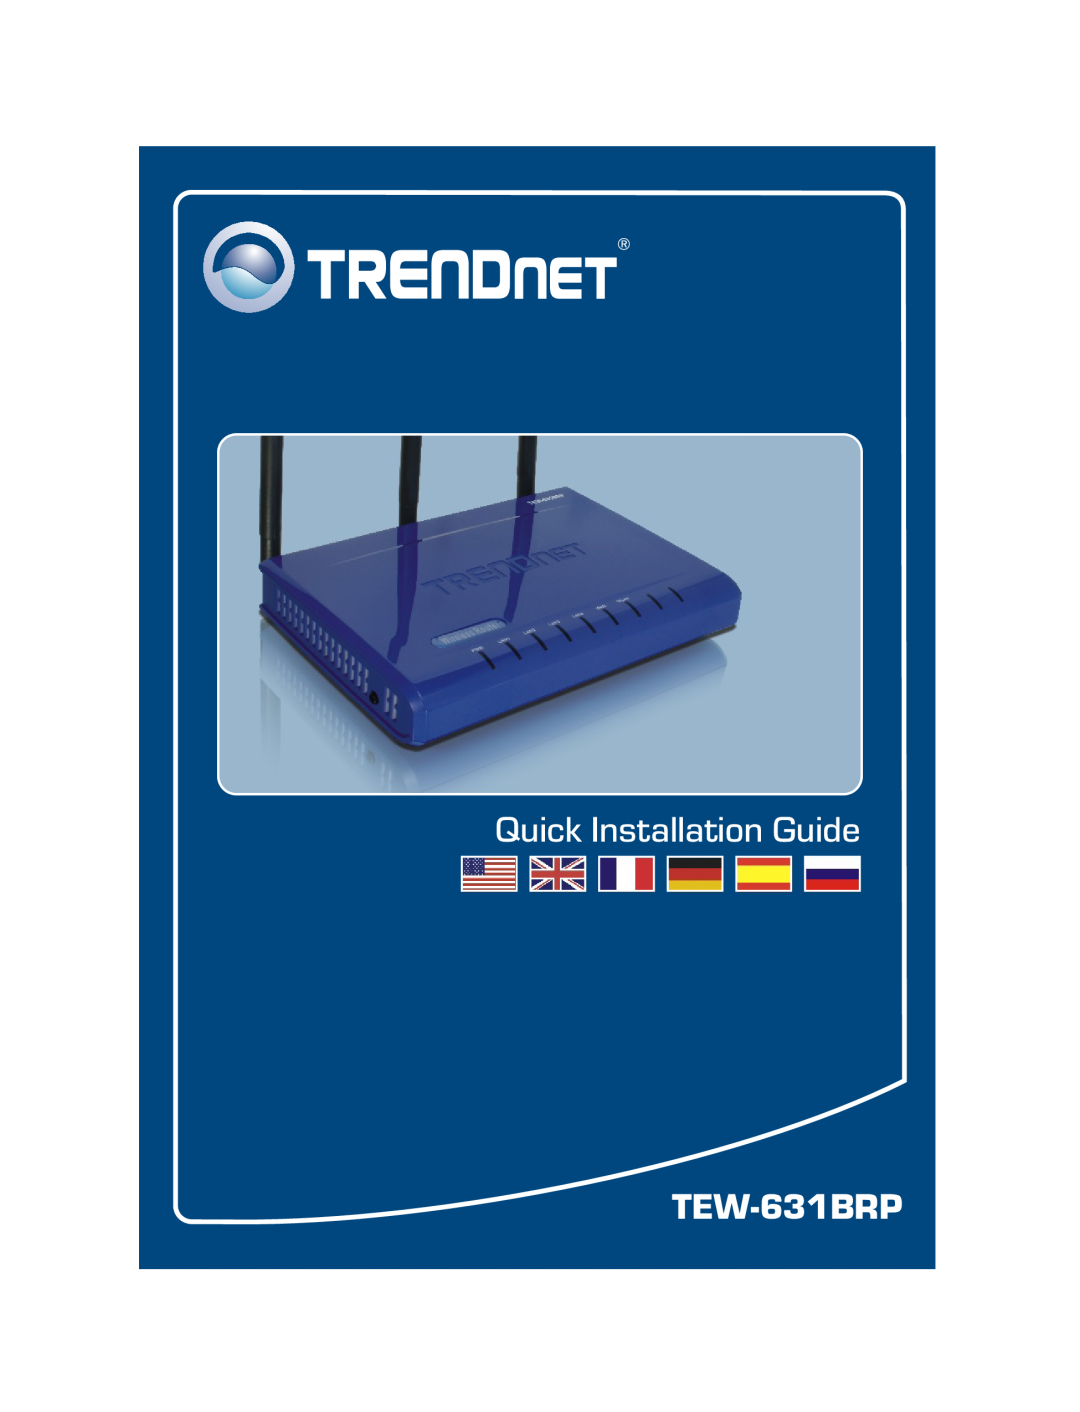 TRENDnet TEW-631BRP manual Quick Installation Guide 